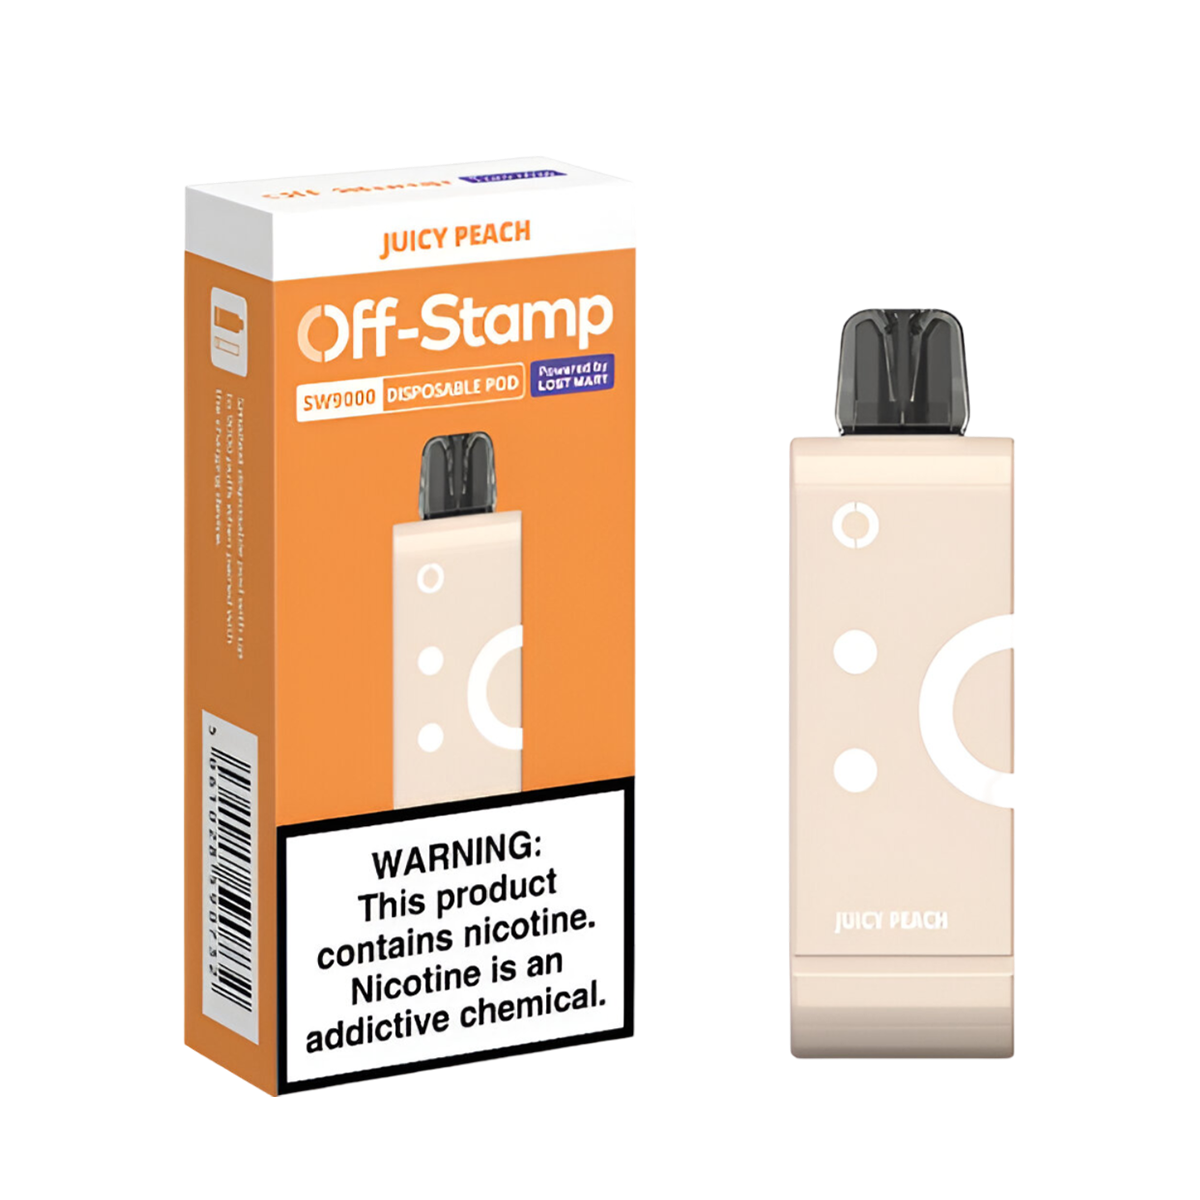 OFF Stamp SW9000 Disposable Vape Juicy Peach  